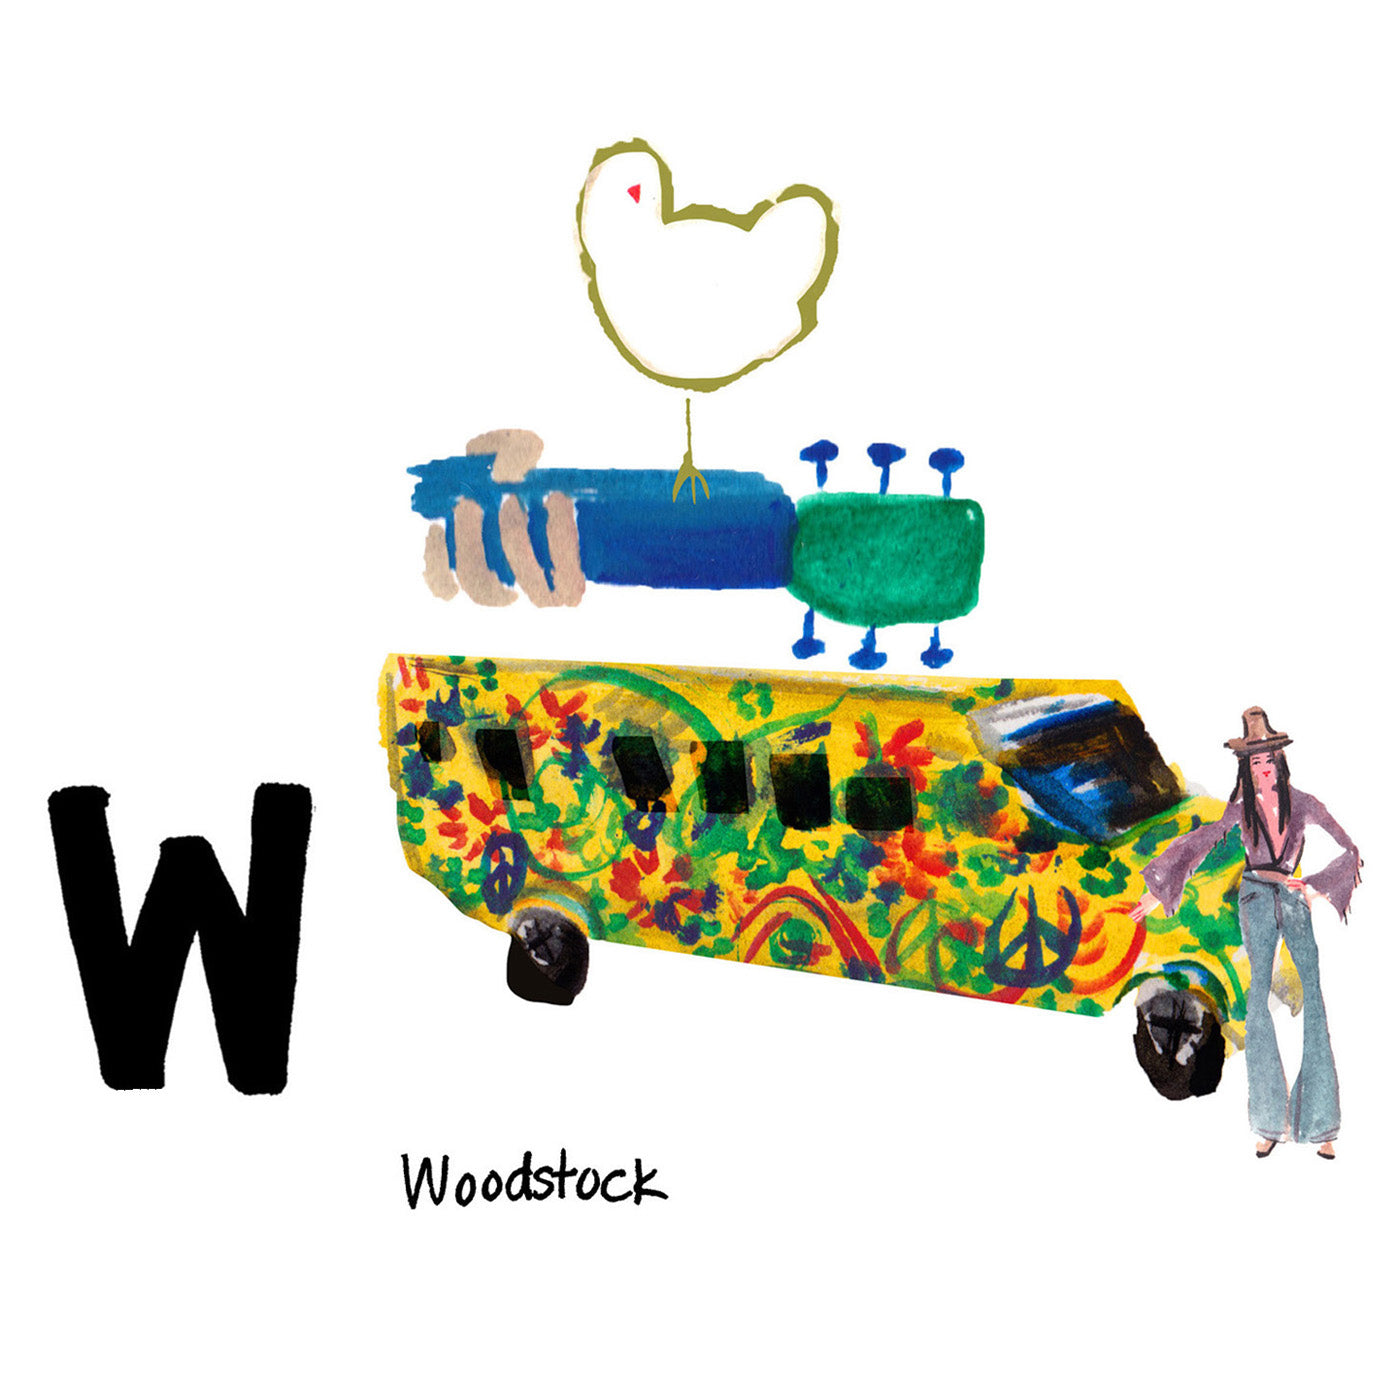 W is for Woodstock. The music festival was hosted in 1969 by a dairy farm in Bethel, NY after the towns of Woodstock and Wallkill refused. It lasted four days and had around 400,000 attendees.